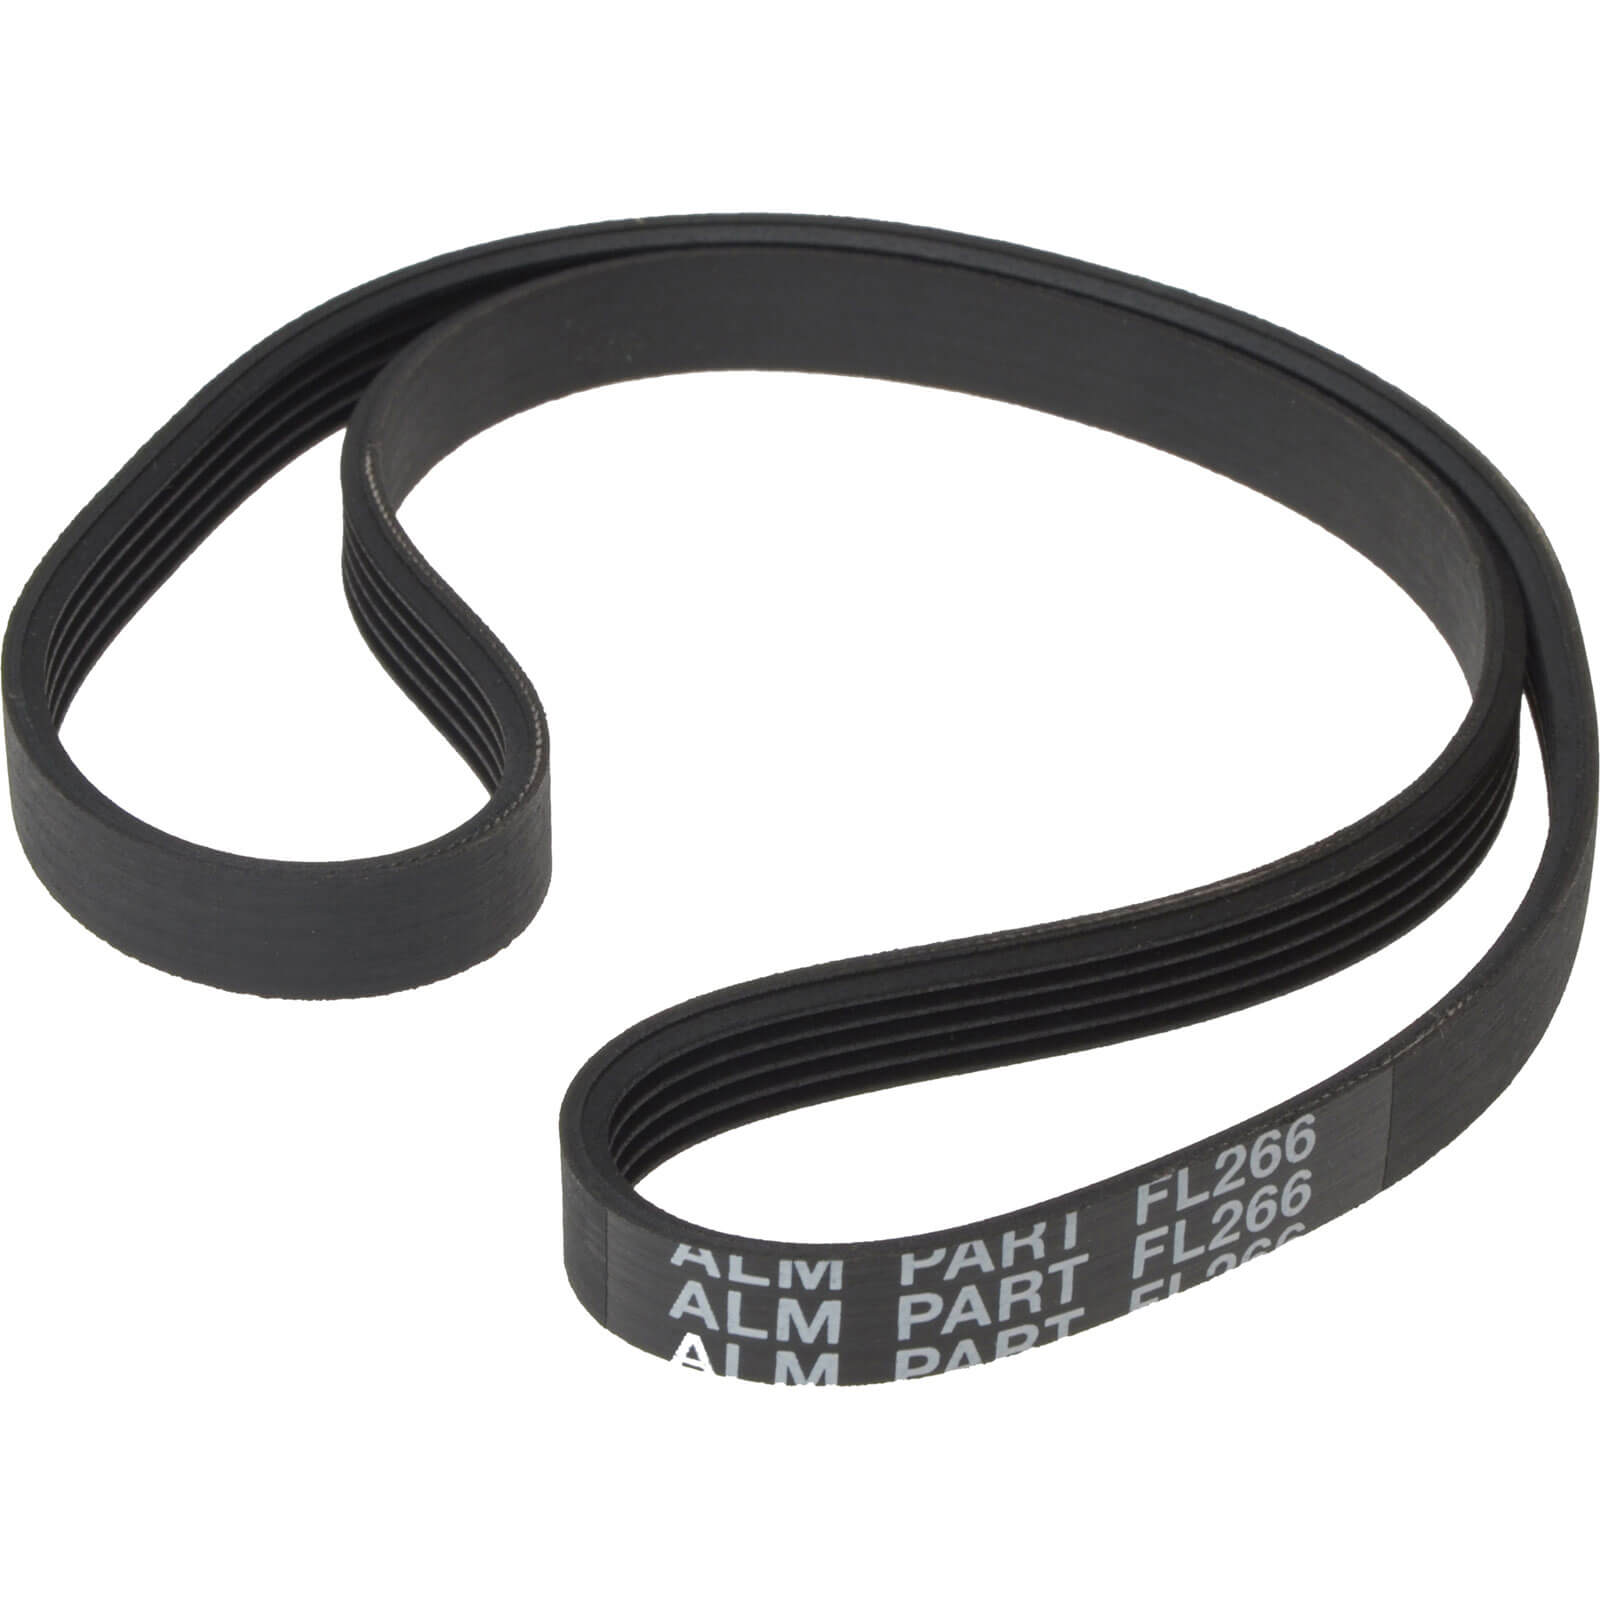 ALM FL266 Poly V Belt for Flymo Turbo Compact